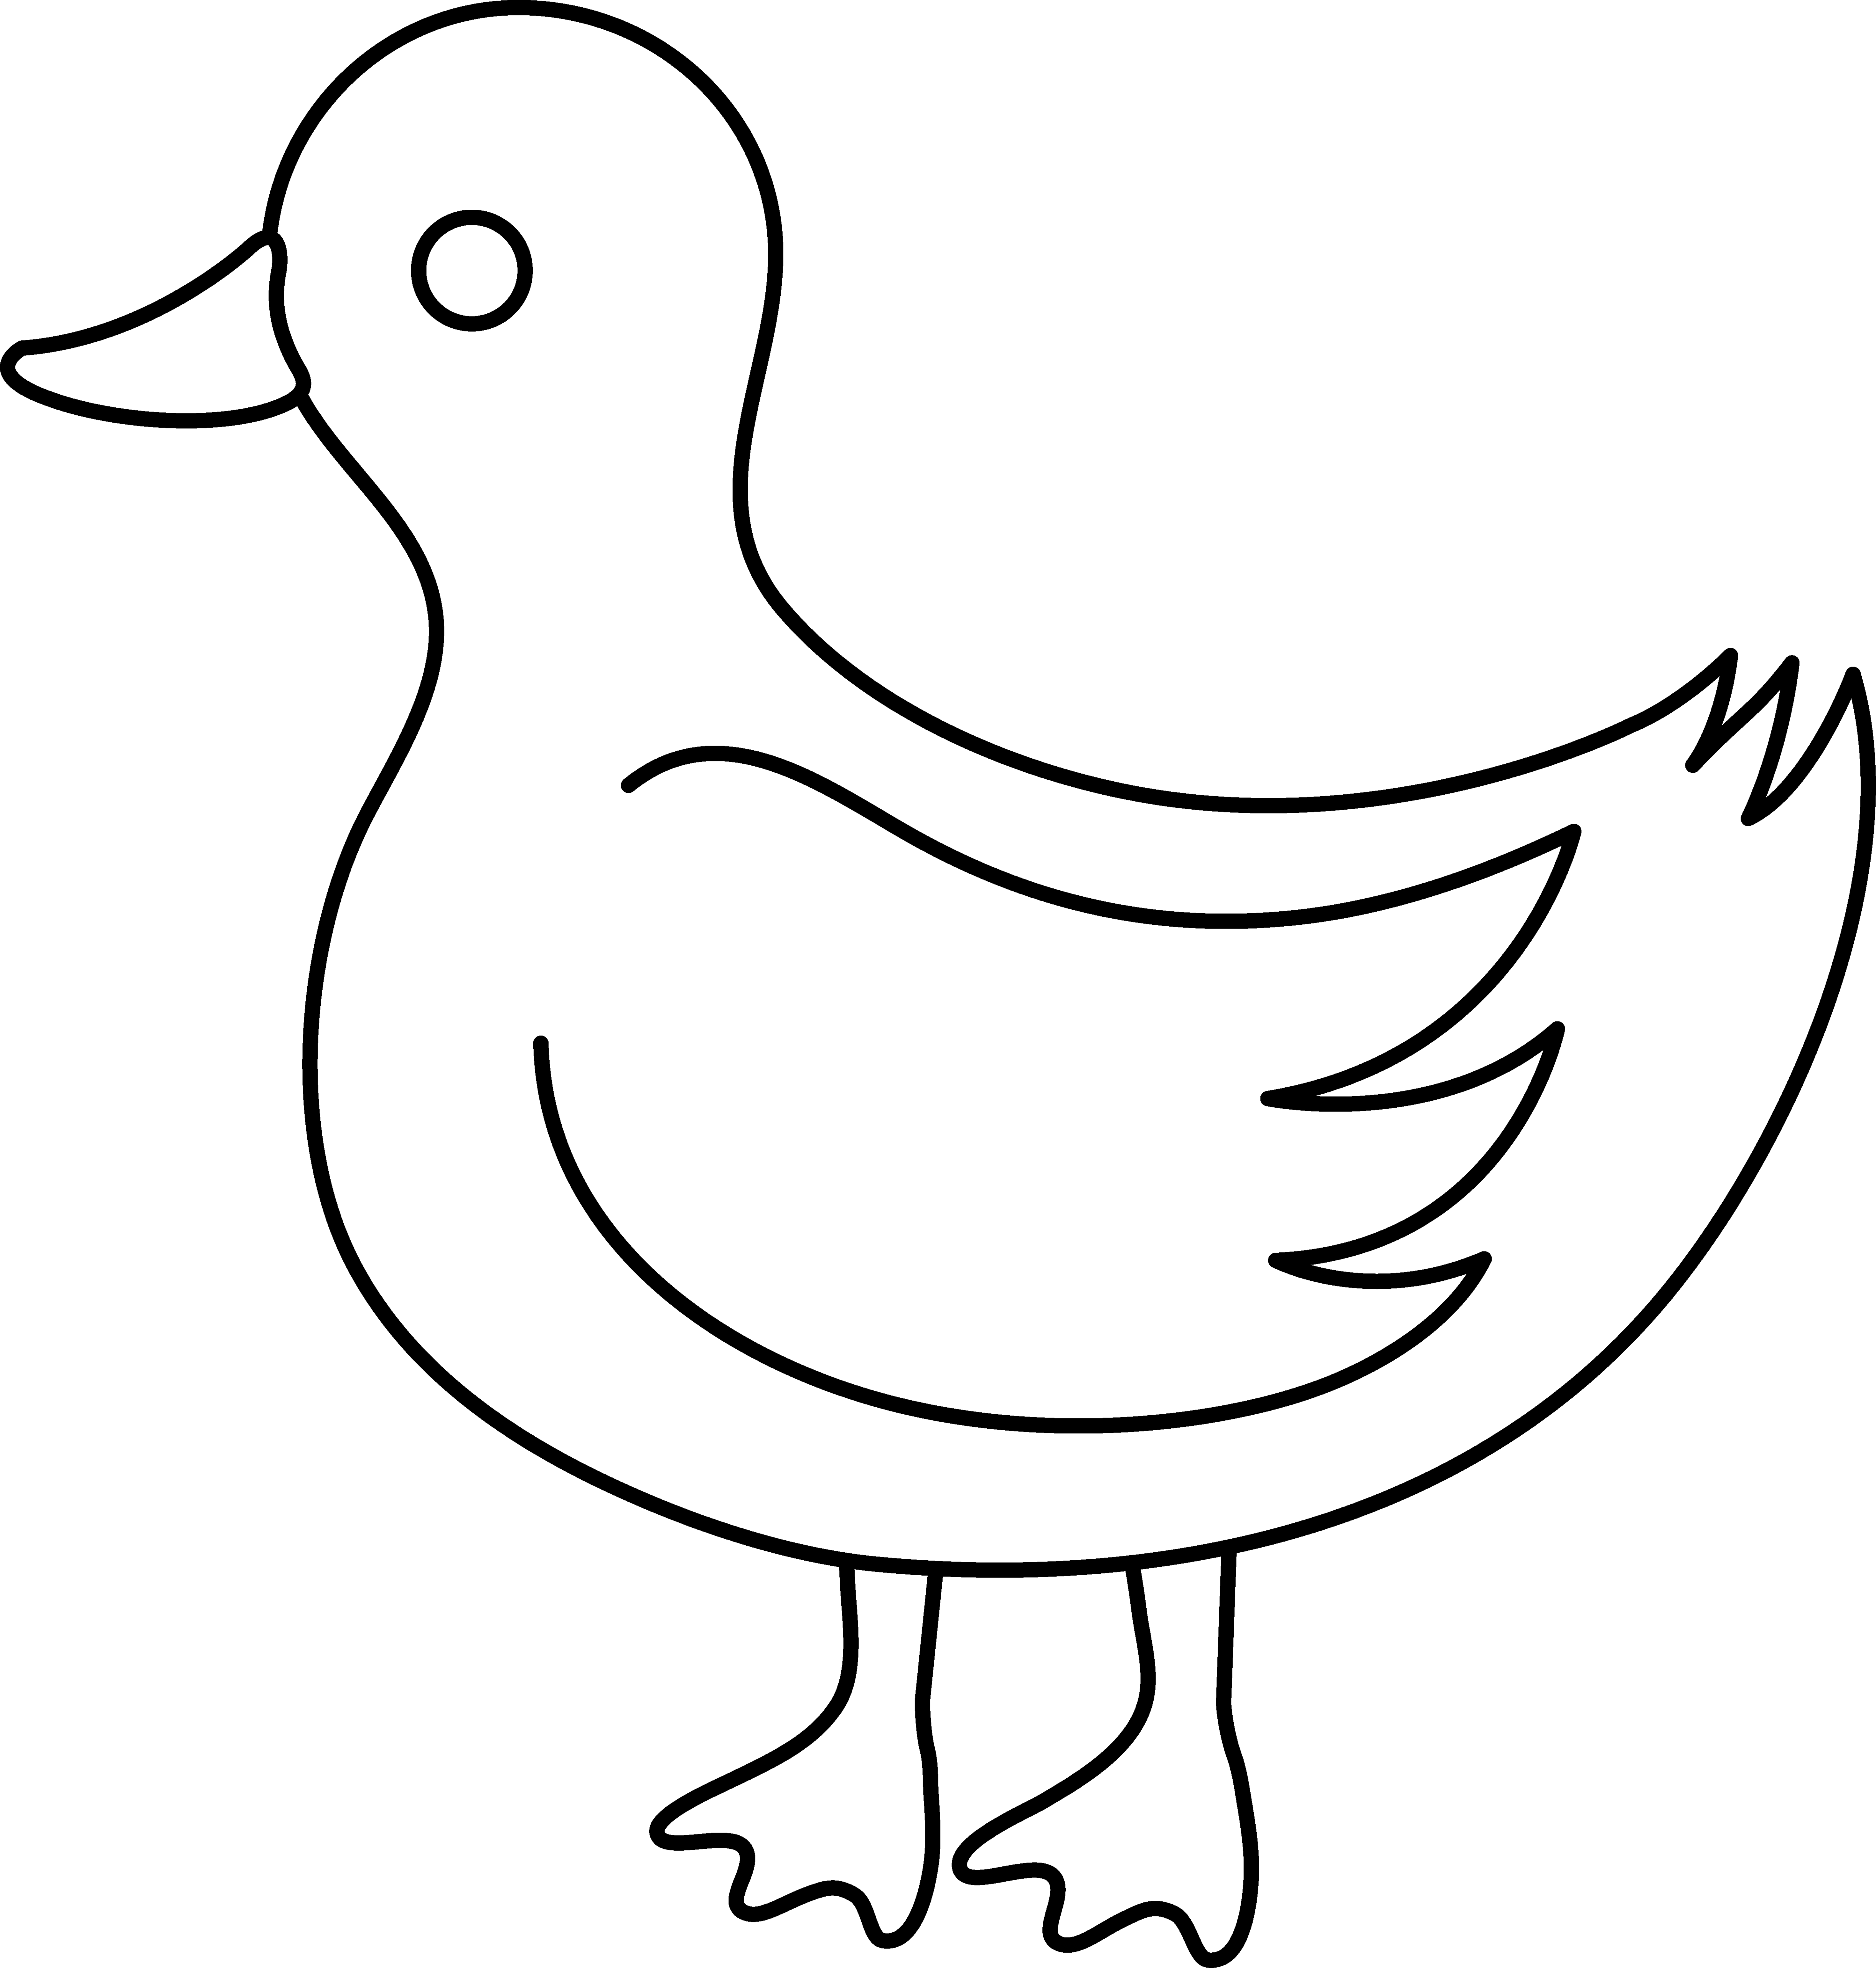 Duckling black and white. Ducks clipart coloring